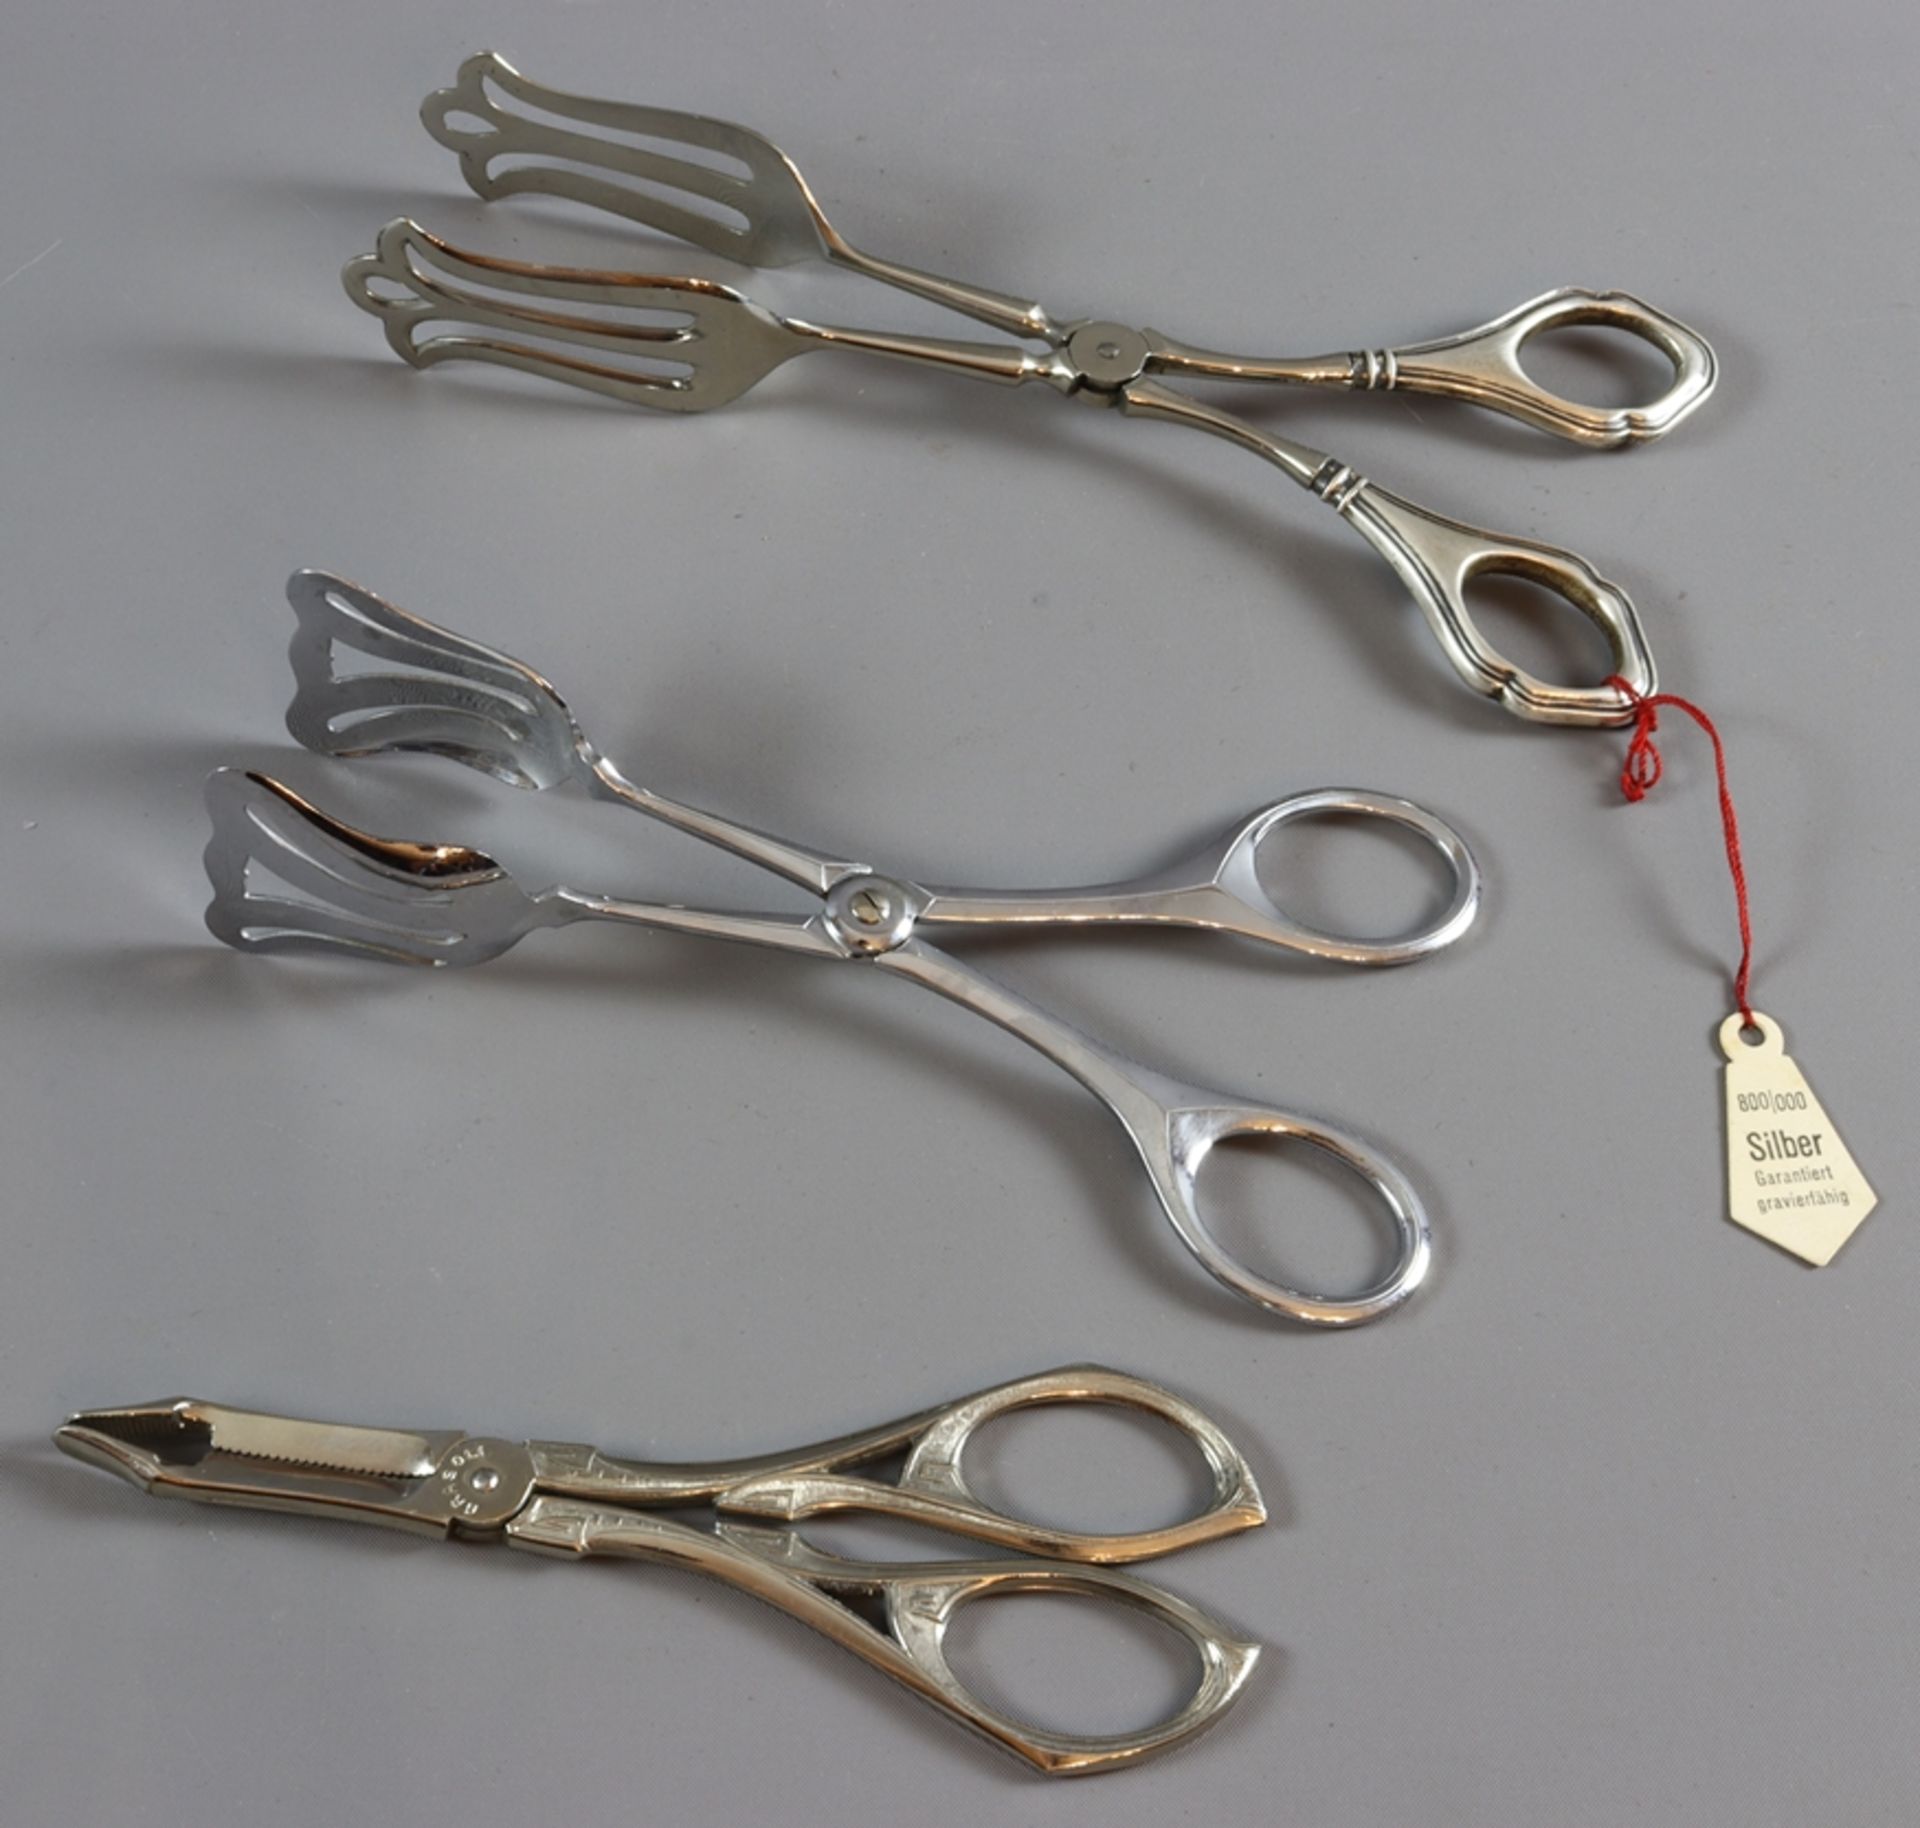 Silver pastry tongs and others, Historism 1900 - 1920, German